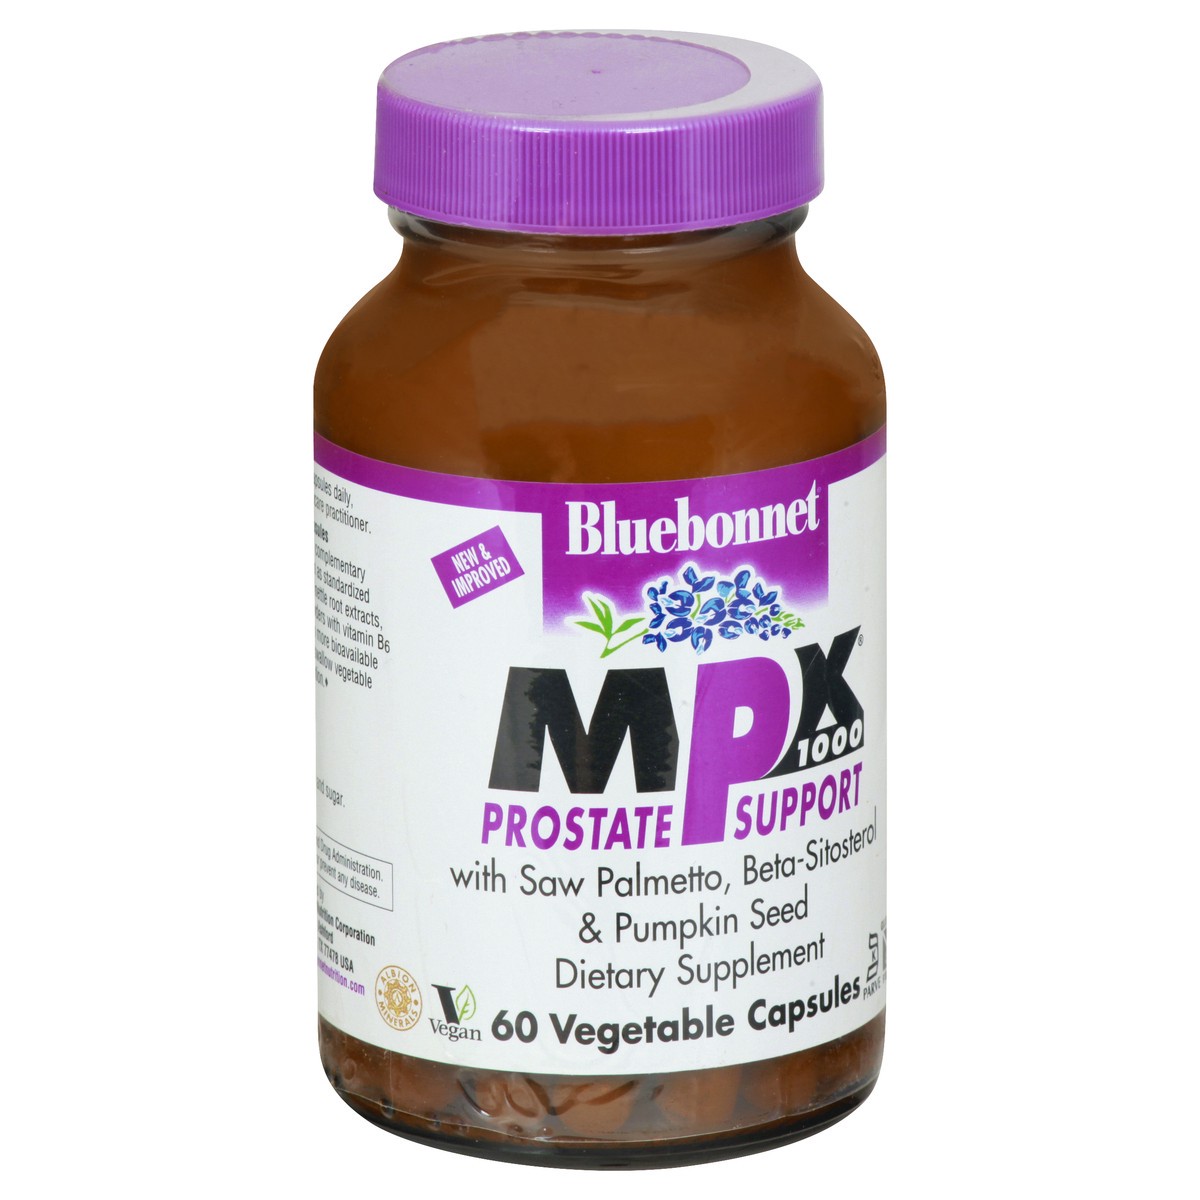 slide 5 of 12, Bluebonnet Nutrition Mpx 1000 Prostate Support, Vegetable Capsules, 60 ct